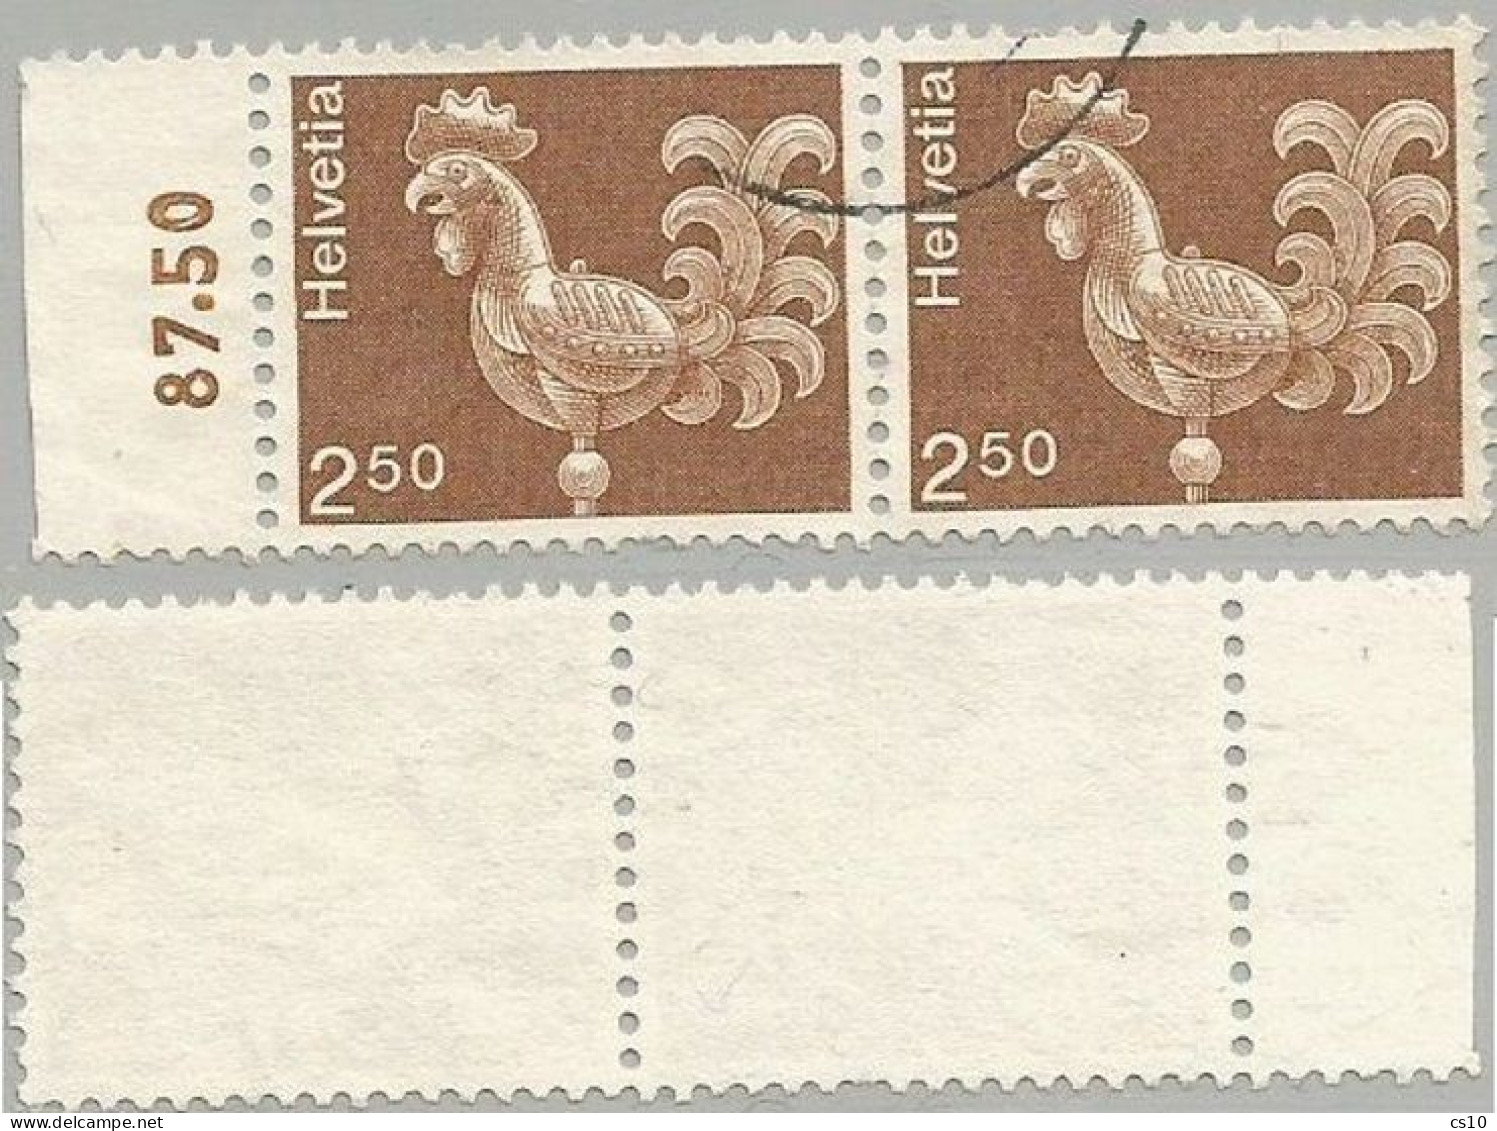 Suisse 1975 Artworks Wheatercock FS.2,50 - Scarce Variety NON FLUO PAPER - #2 Pcs In Horiz. Pair With Sheet Margin - Poststempel